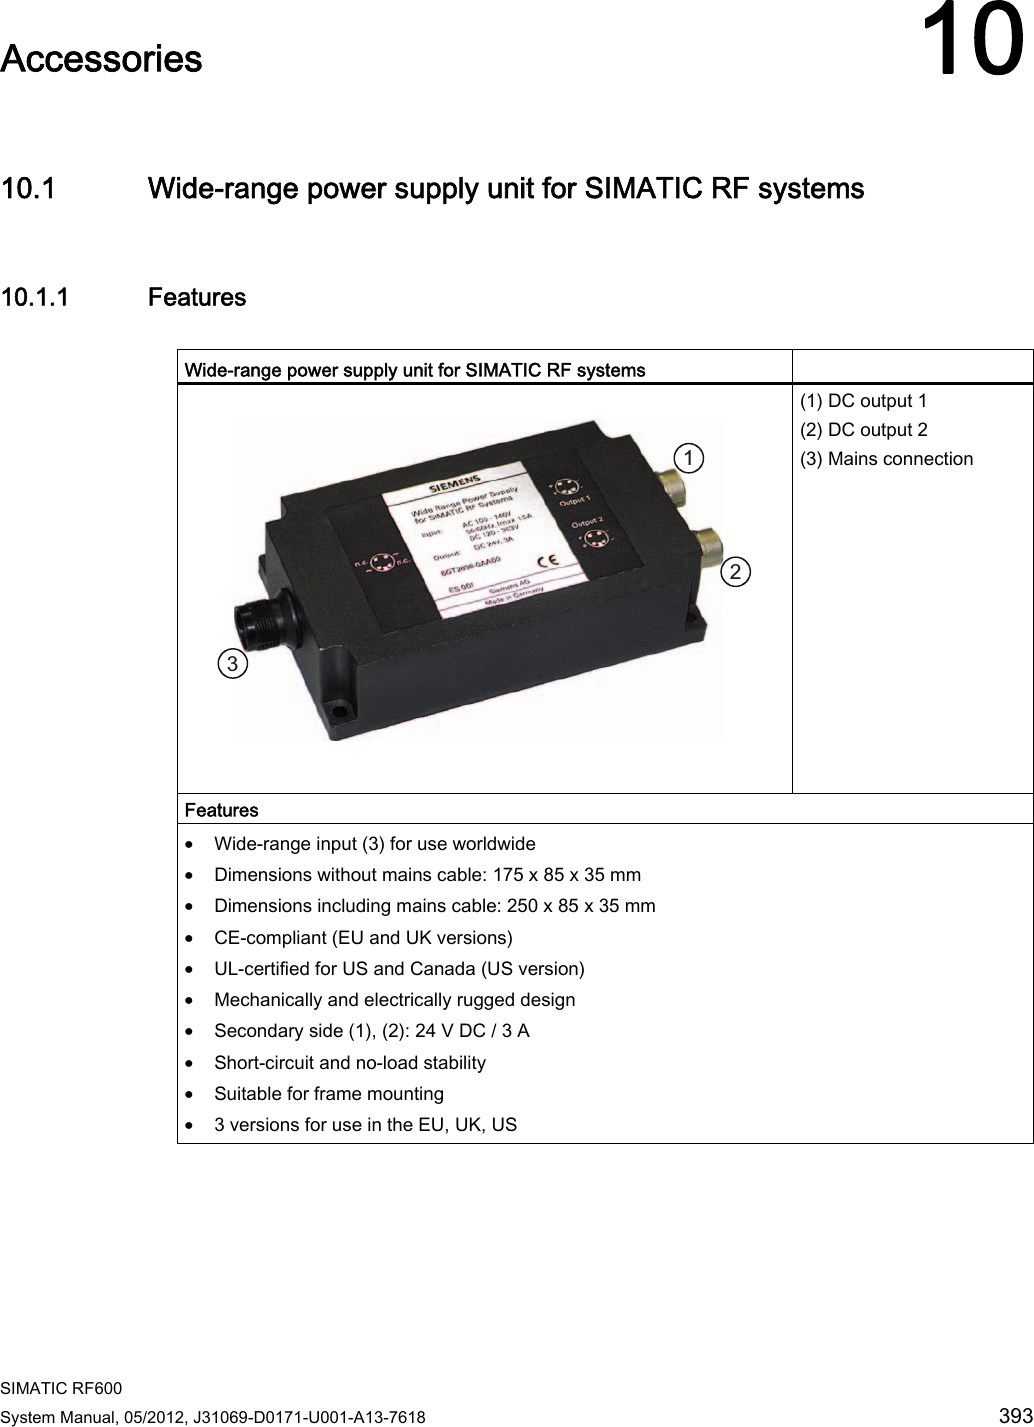  SIMATIC RF600 System Manual, 05/2012, J31069-D0171-U001-A13-7618  393 Accessories 1010.1 Wide-range power supply unit for SIMATIC RF systems 10.1.1 Features  Wide-range power supply unit for SIMATIC RF systems       (1) DC output 1 (2) DC output 2 (3) Mains connection Features • Wide-range input (3) for use worldwide • Dimensions without mains cable: 175 x 85 x 35 mm • Dimensions including mains cable: 250 x 85 x 35 mm • CE-compliant (EU and UK versions) • UL-certified for US and Canada (US version) • Mechanically and electrically rugged design • Secondary side (1), (2): 24 V DC / 3 A • Short-circuit and no-load stability • Suitable for frame mounting • 3 versions for use in the EU, UK, US 